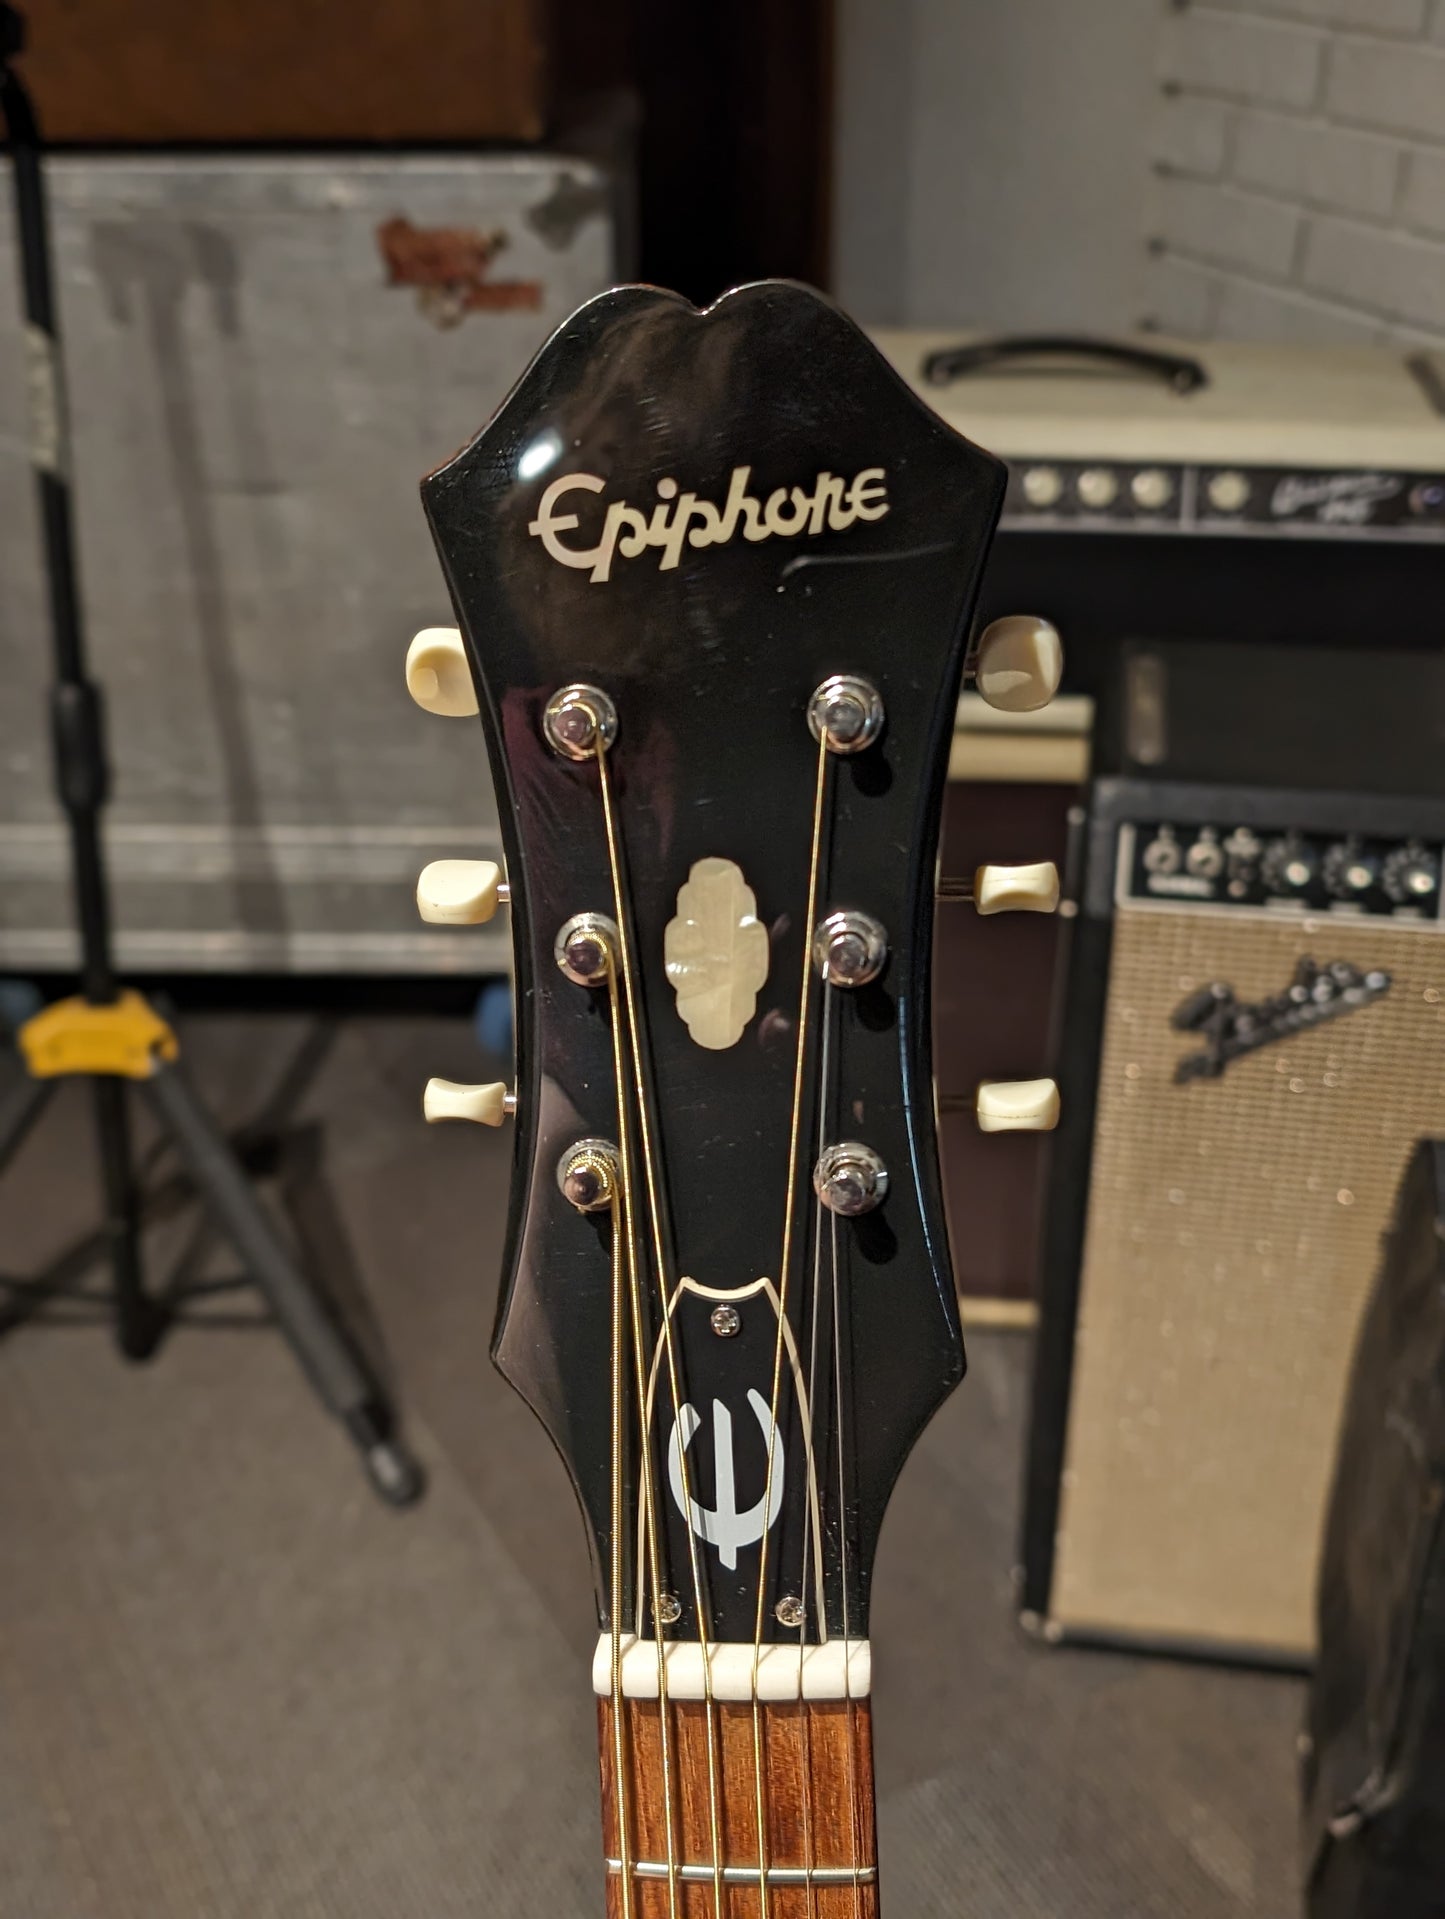 Epiphone FT-79 "Inspired By" 1964  Texan Acoustic/Electric Guitar - Antique Natural (2011)